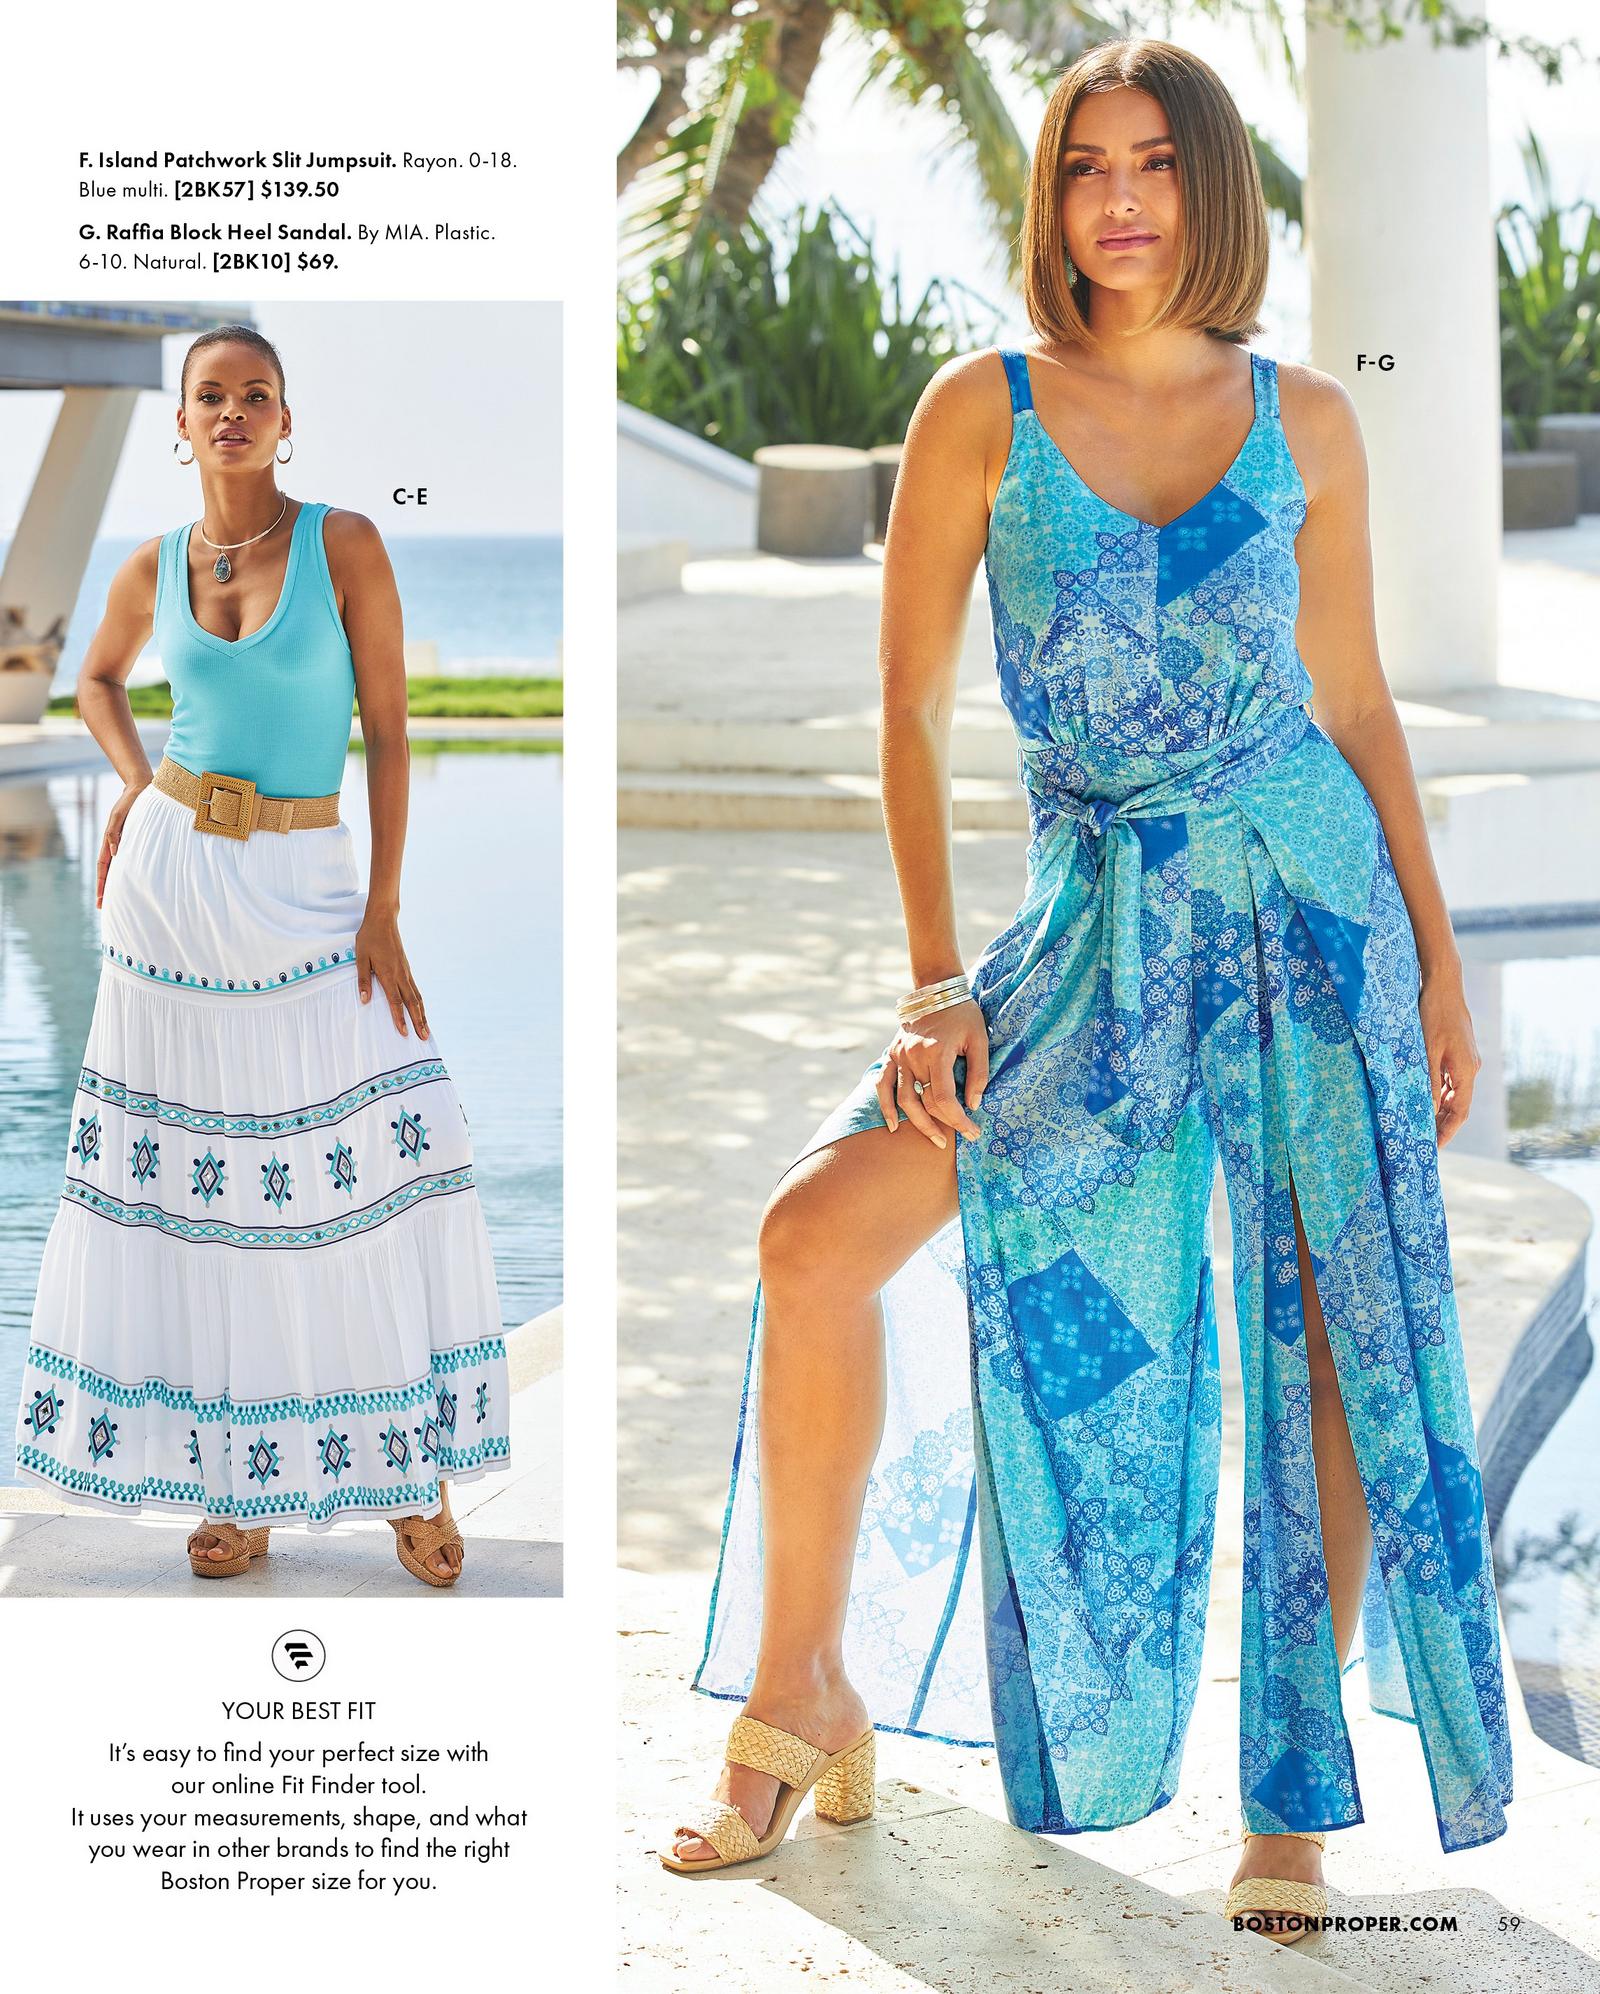 left model wearing a light blue ribbed tank top, raffia belt, blue and white mirror embellished and embroidered maxi skirt, and raffia wedges.